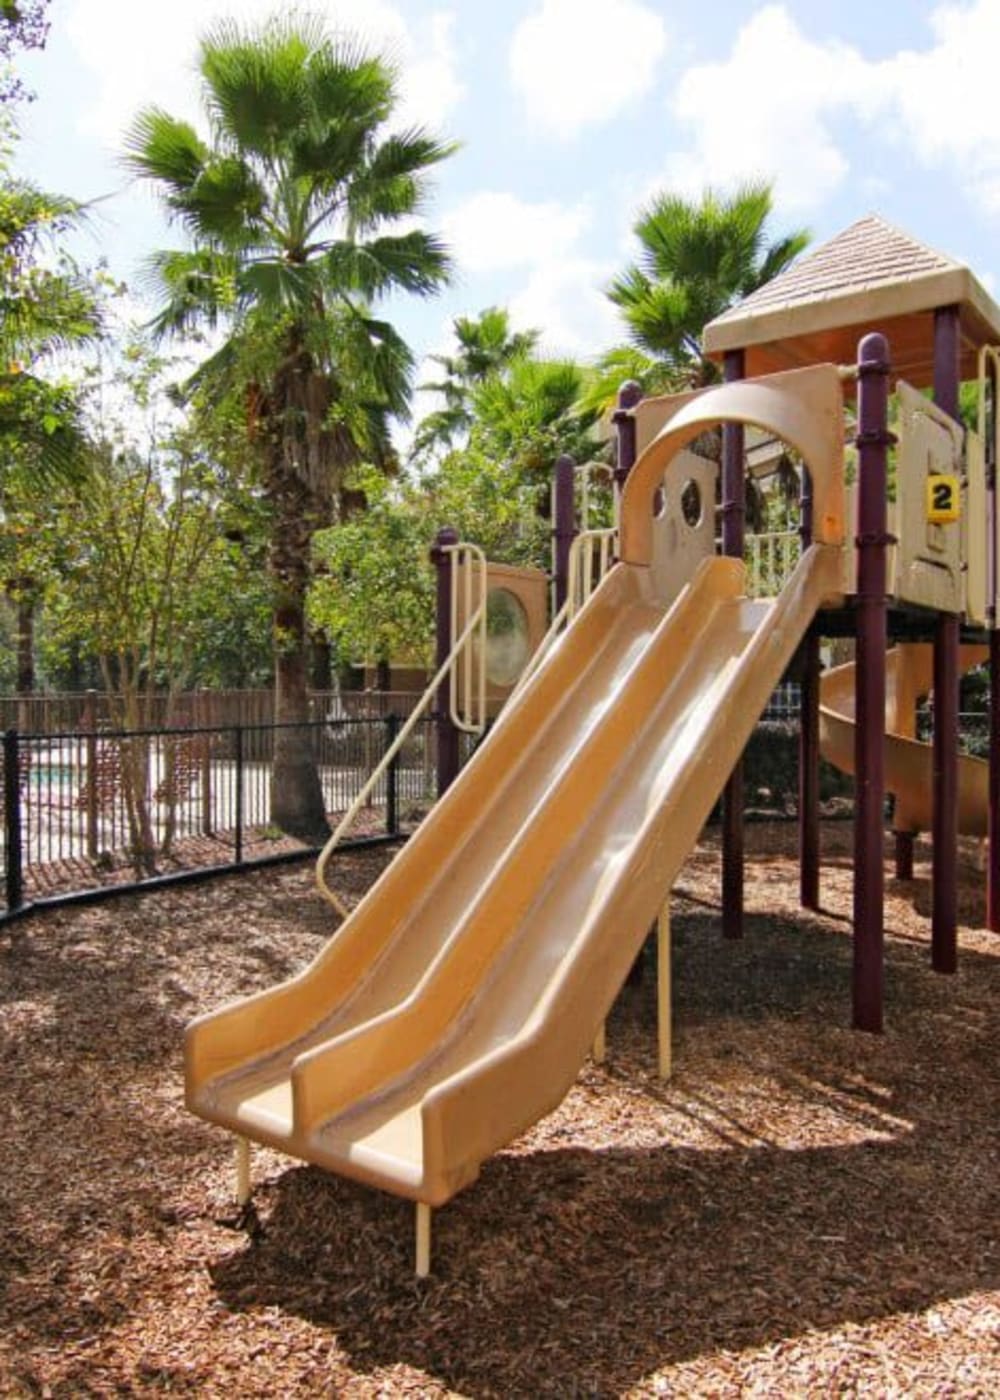 Playground at San Marco Apartments in Ormond Beach, Florida